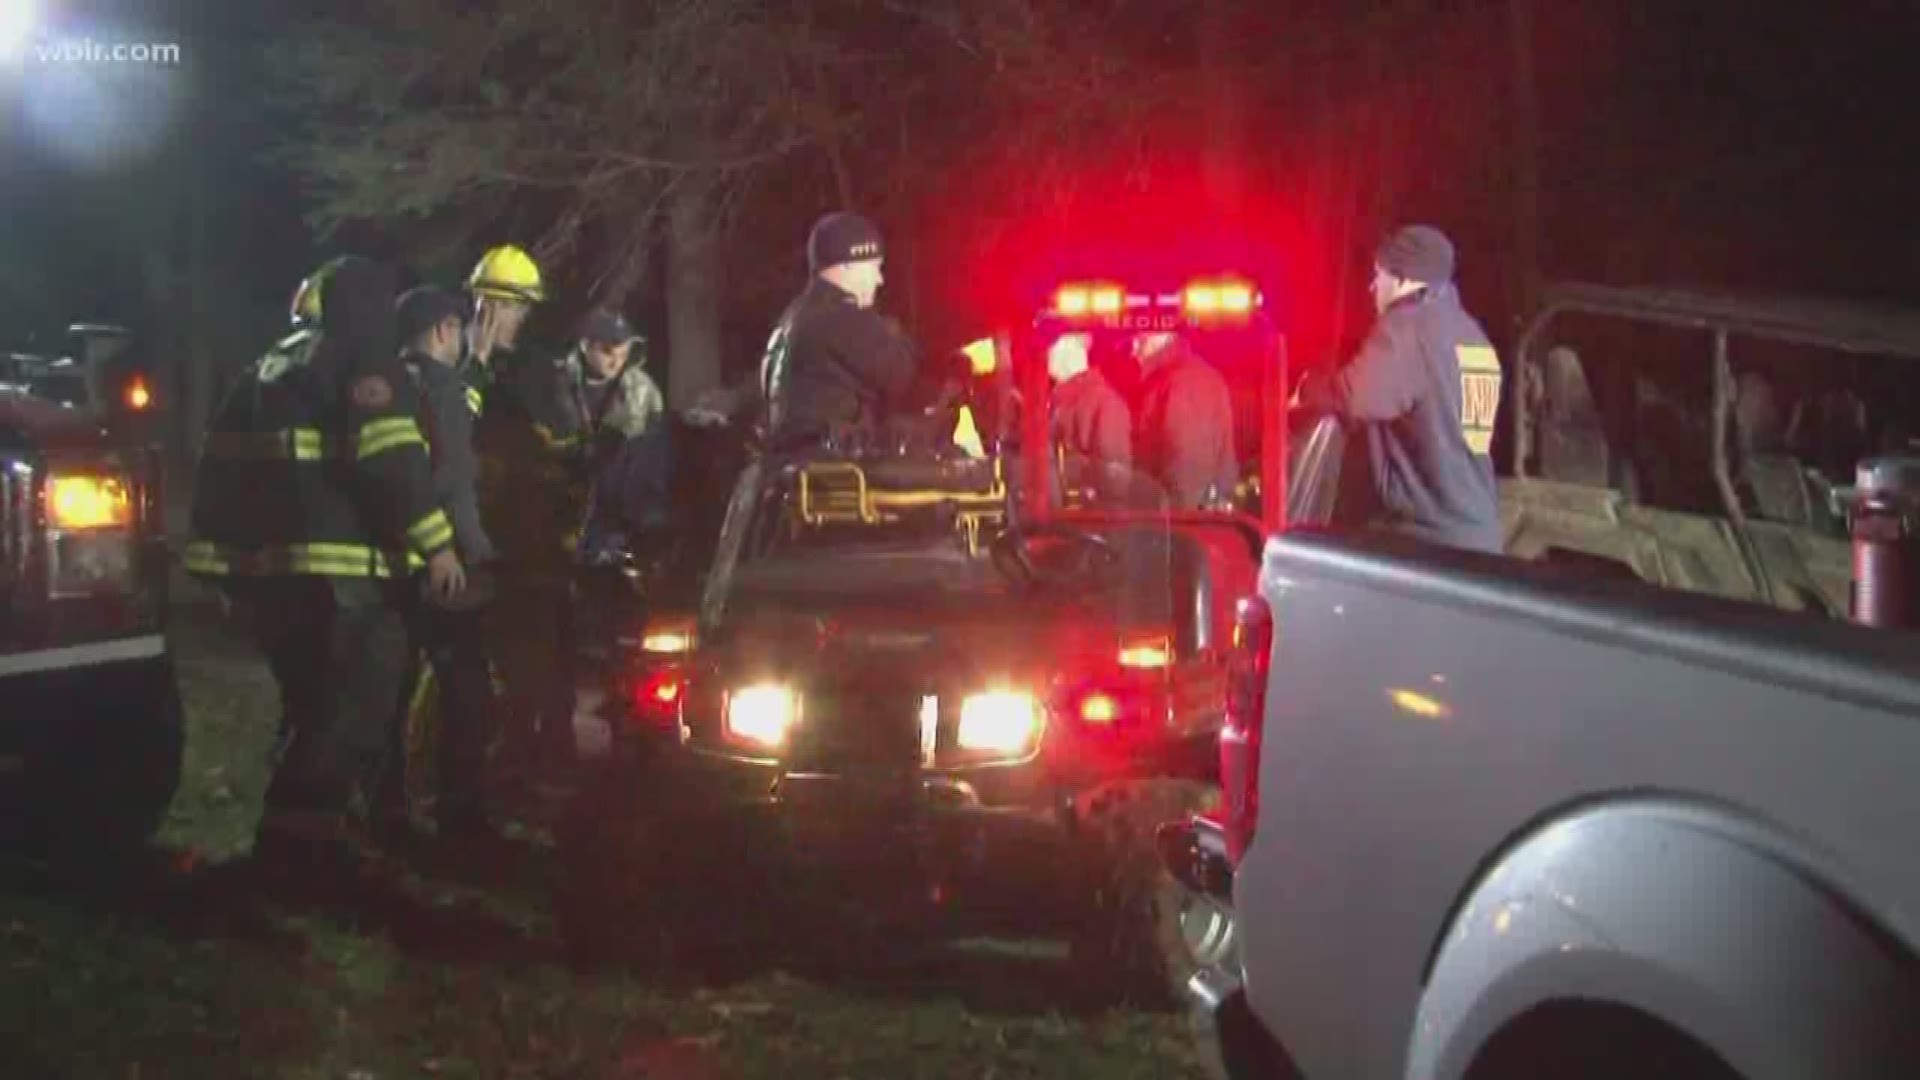 First responders say a man trapped and injured under his ATV in a remote area of Sevier County started a brush fire to draw attention and get help.